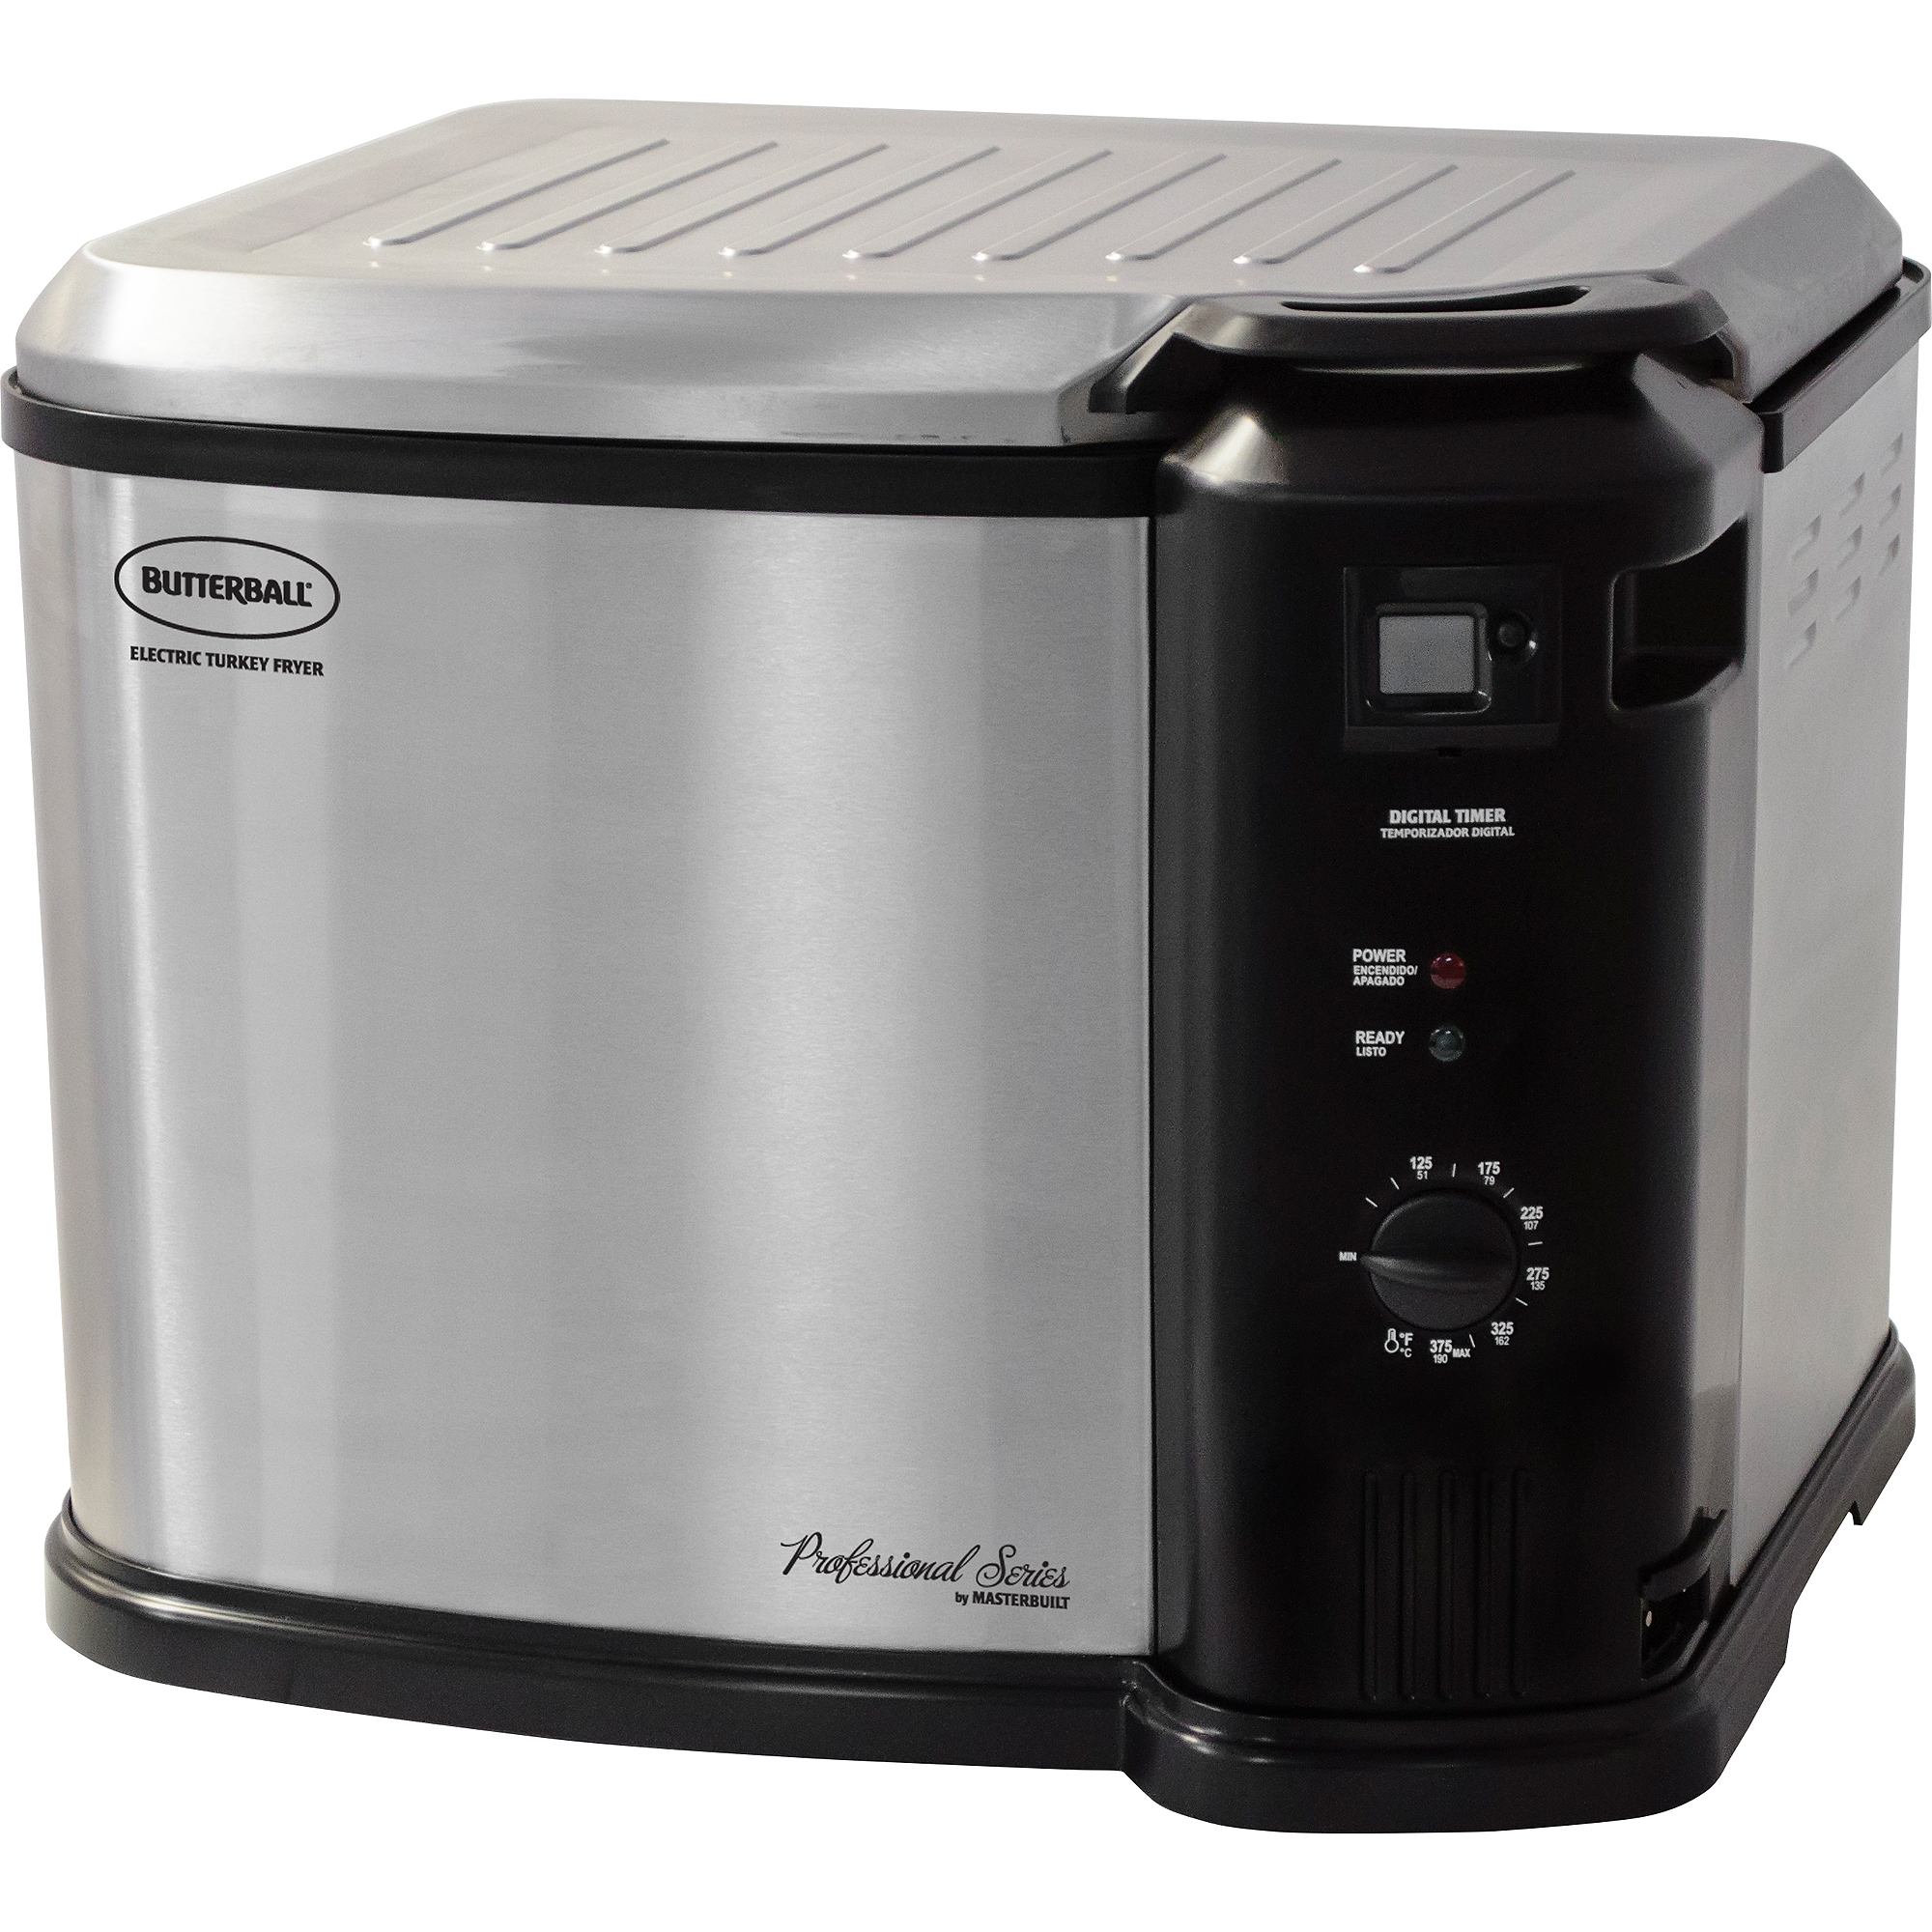 Butterball XL Electric Fryer, Stainless Steel, 2015 model - image 3 of 4